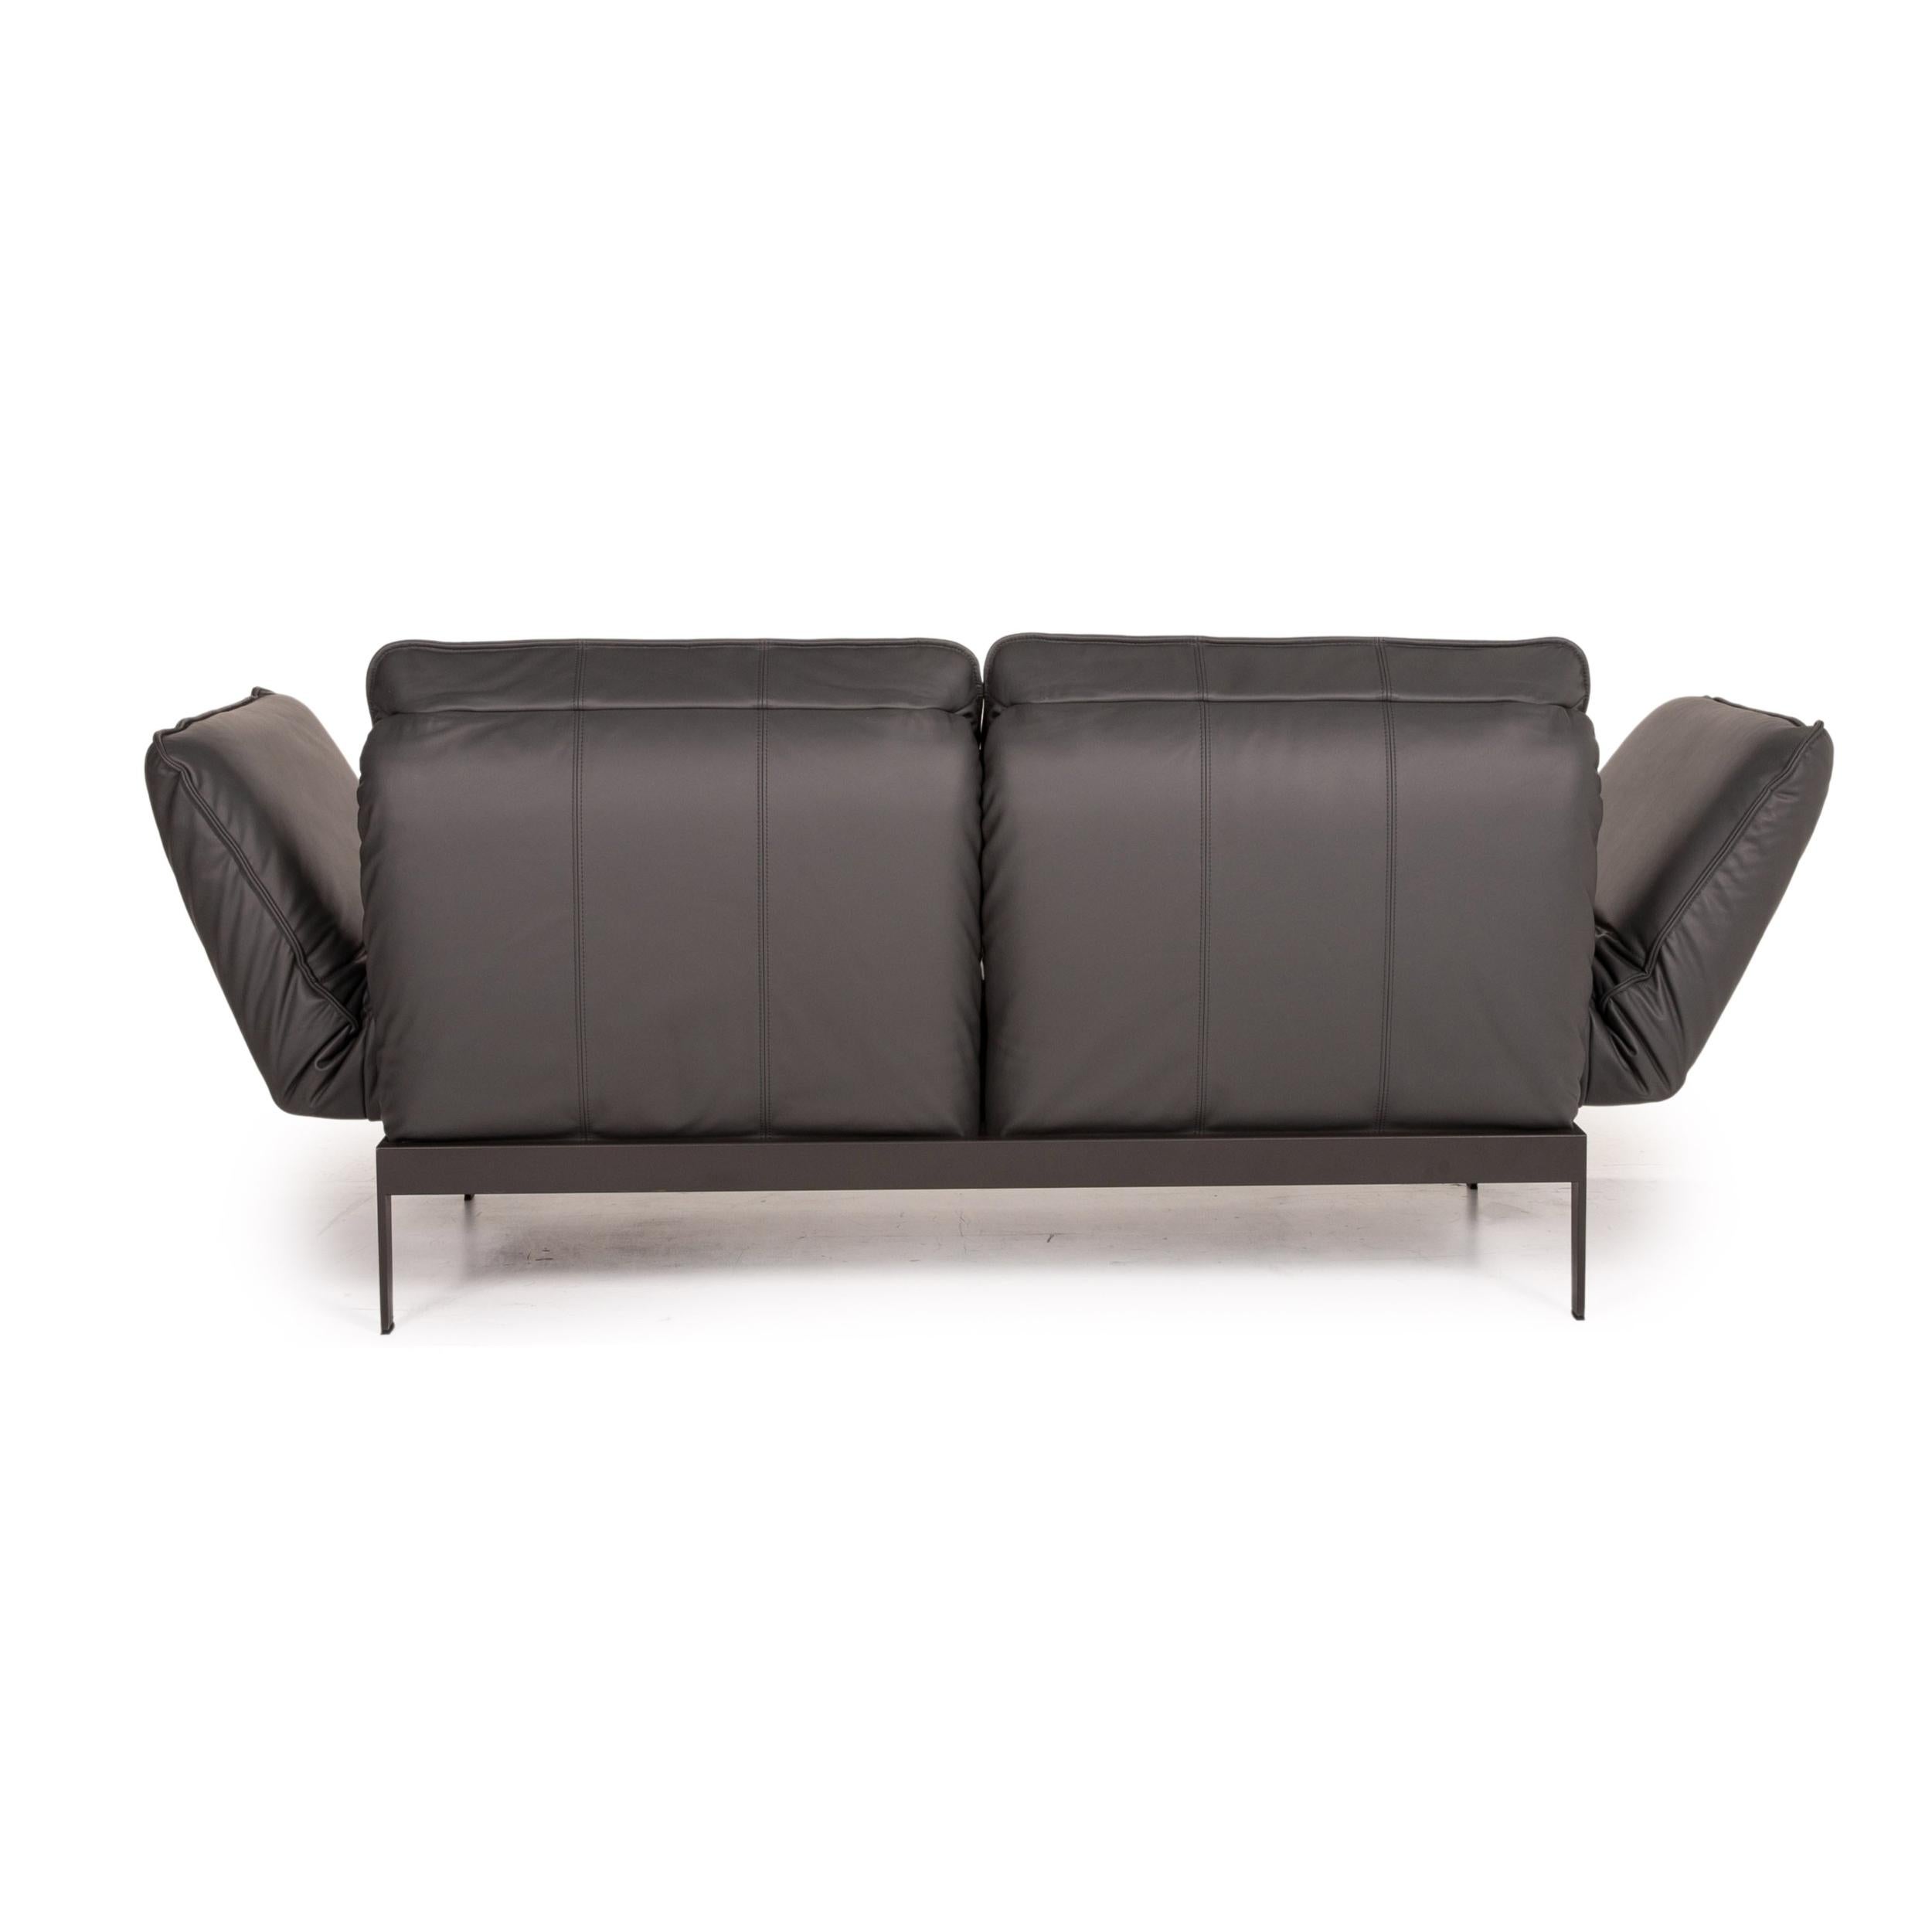 Rolf Benz Mera Leather Sofa Gray Dark Gray Two-Seater Function Relax Function 2